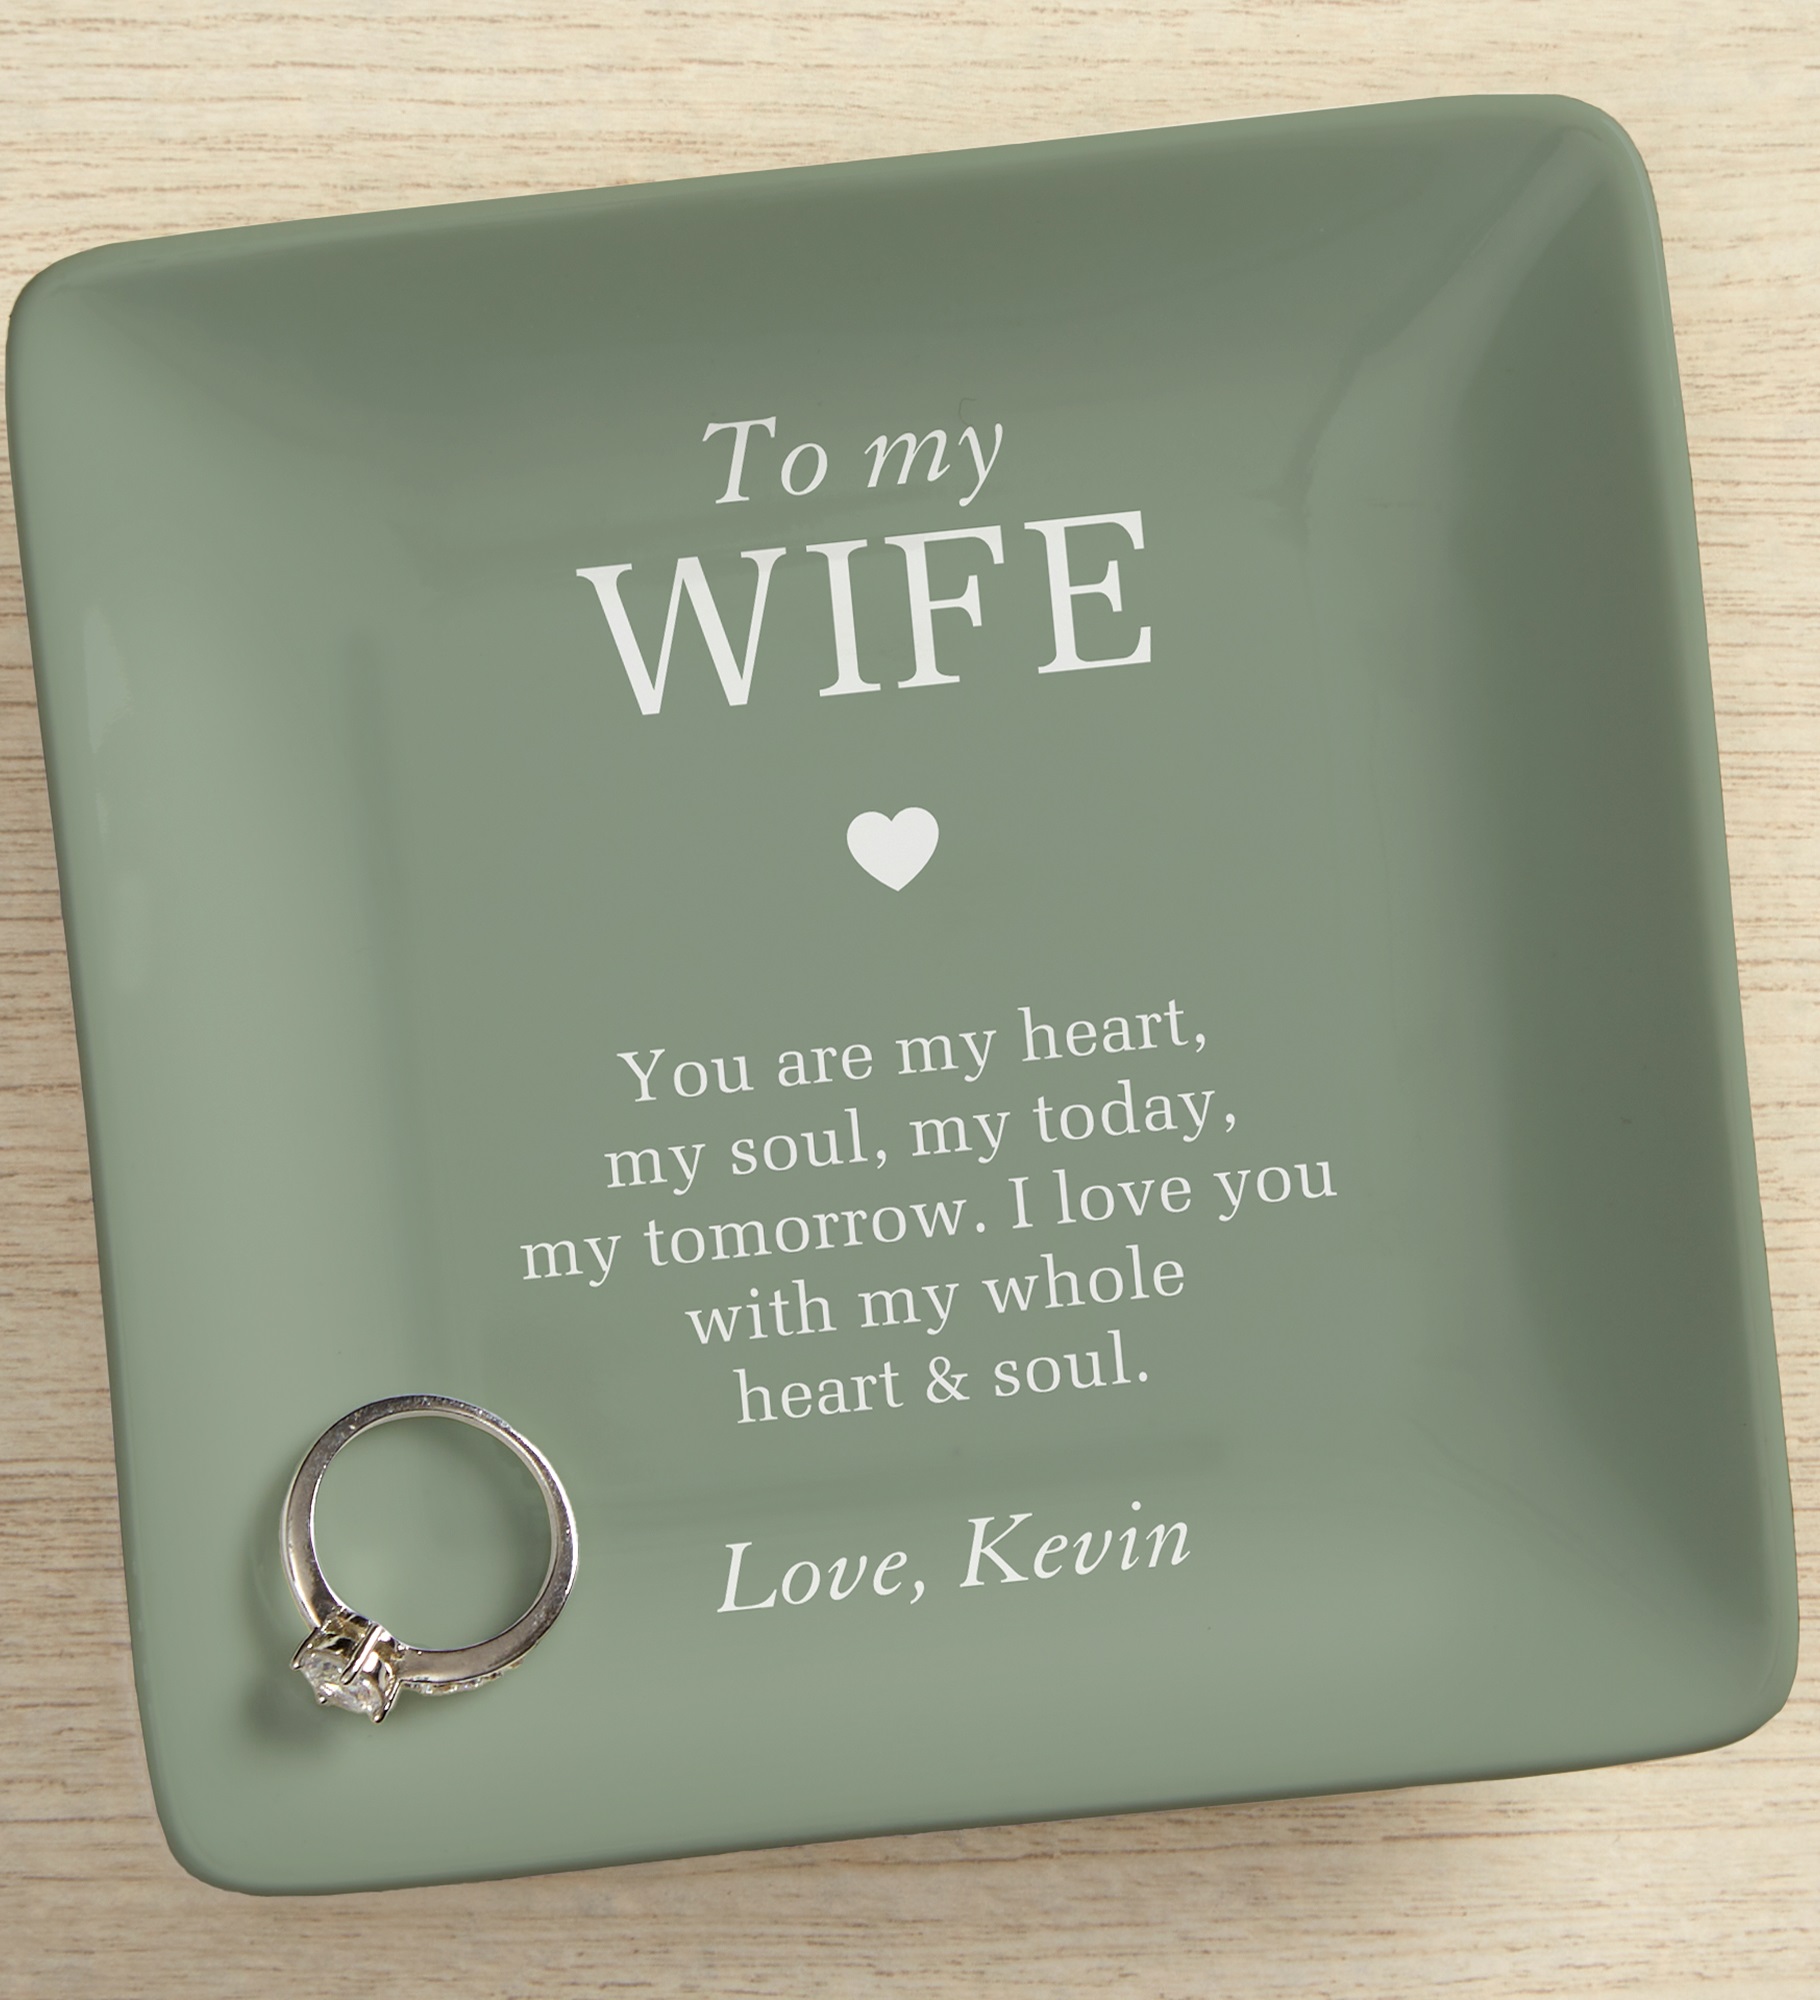 To my Wife Personalized Ring Dish